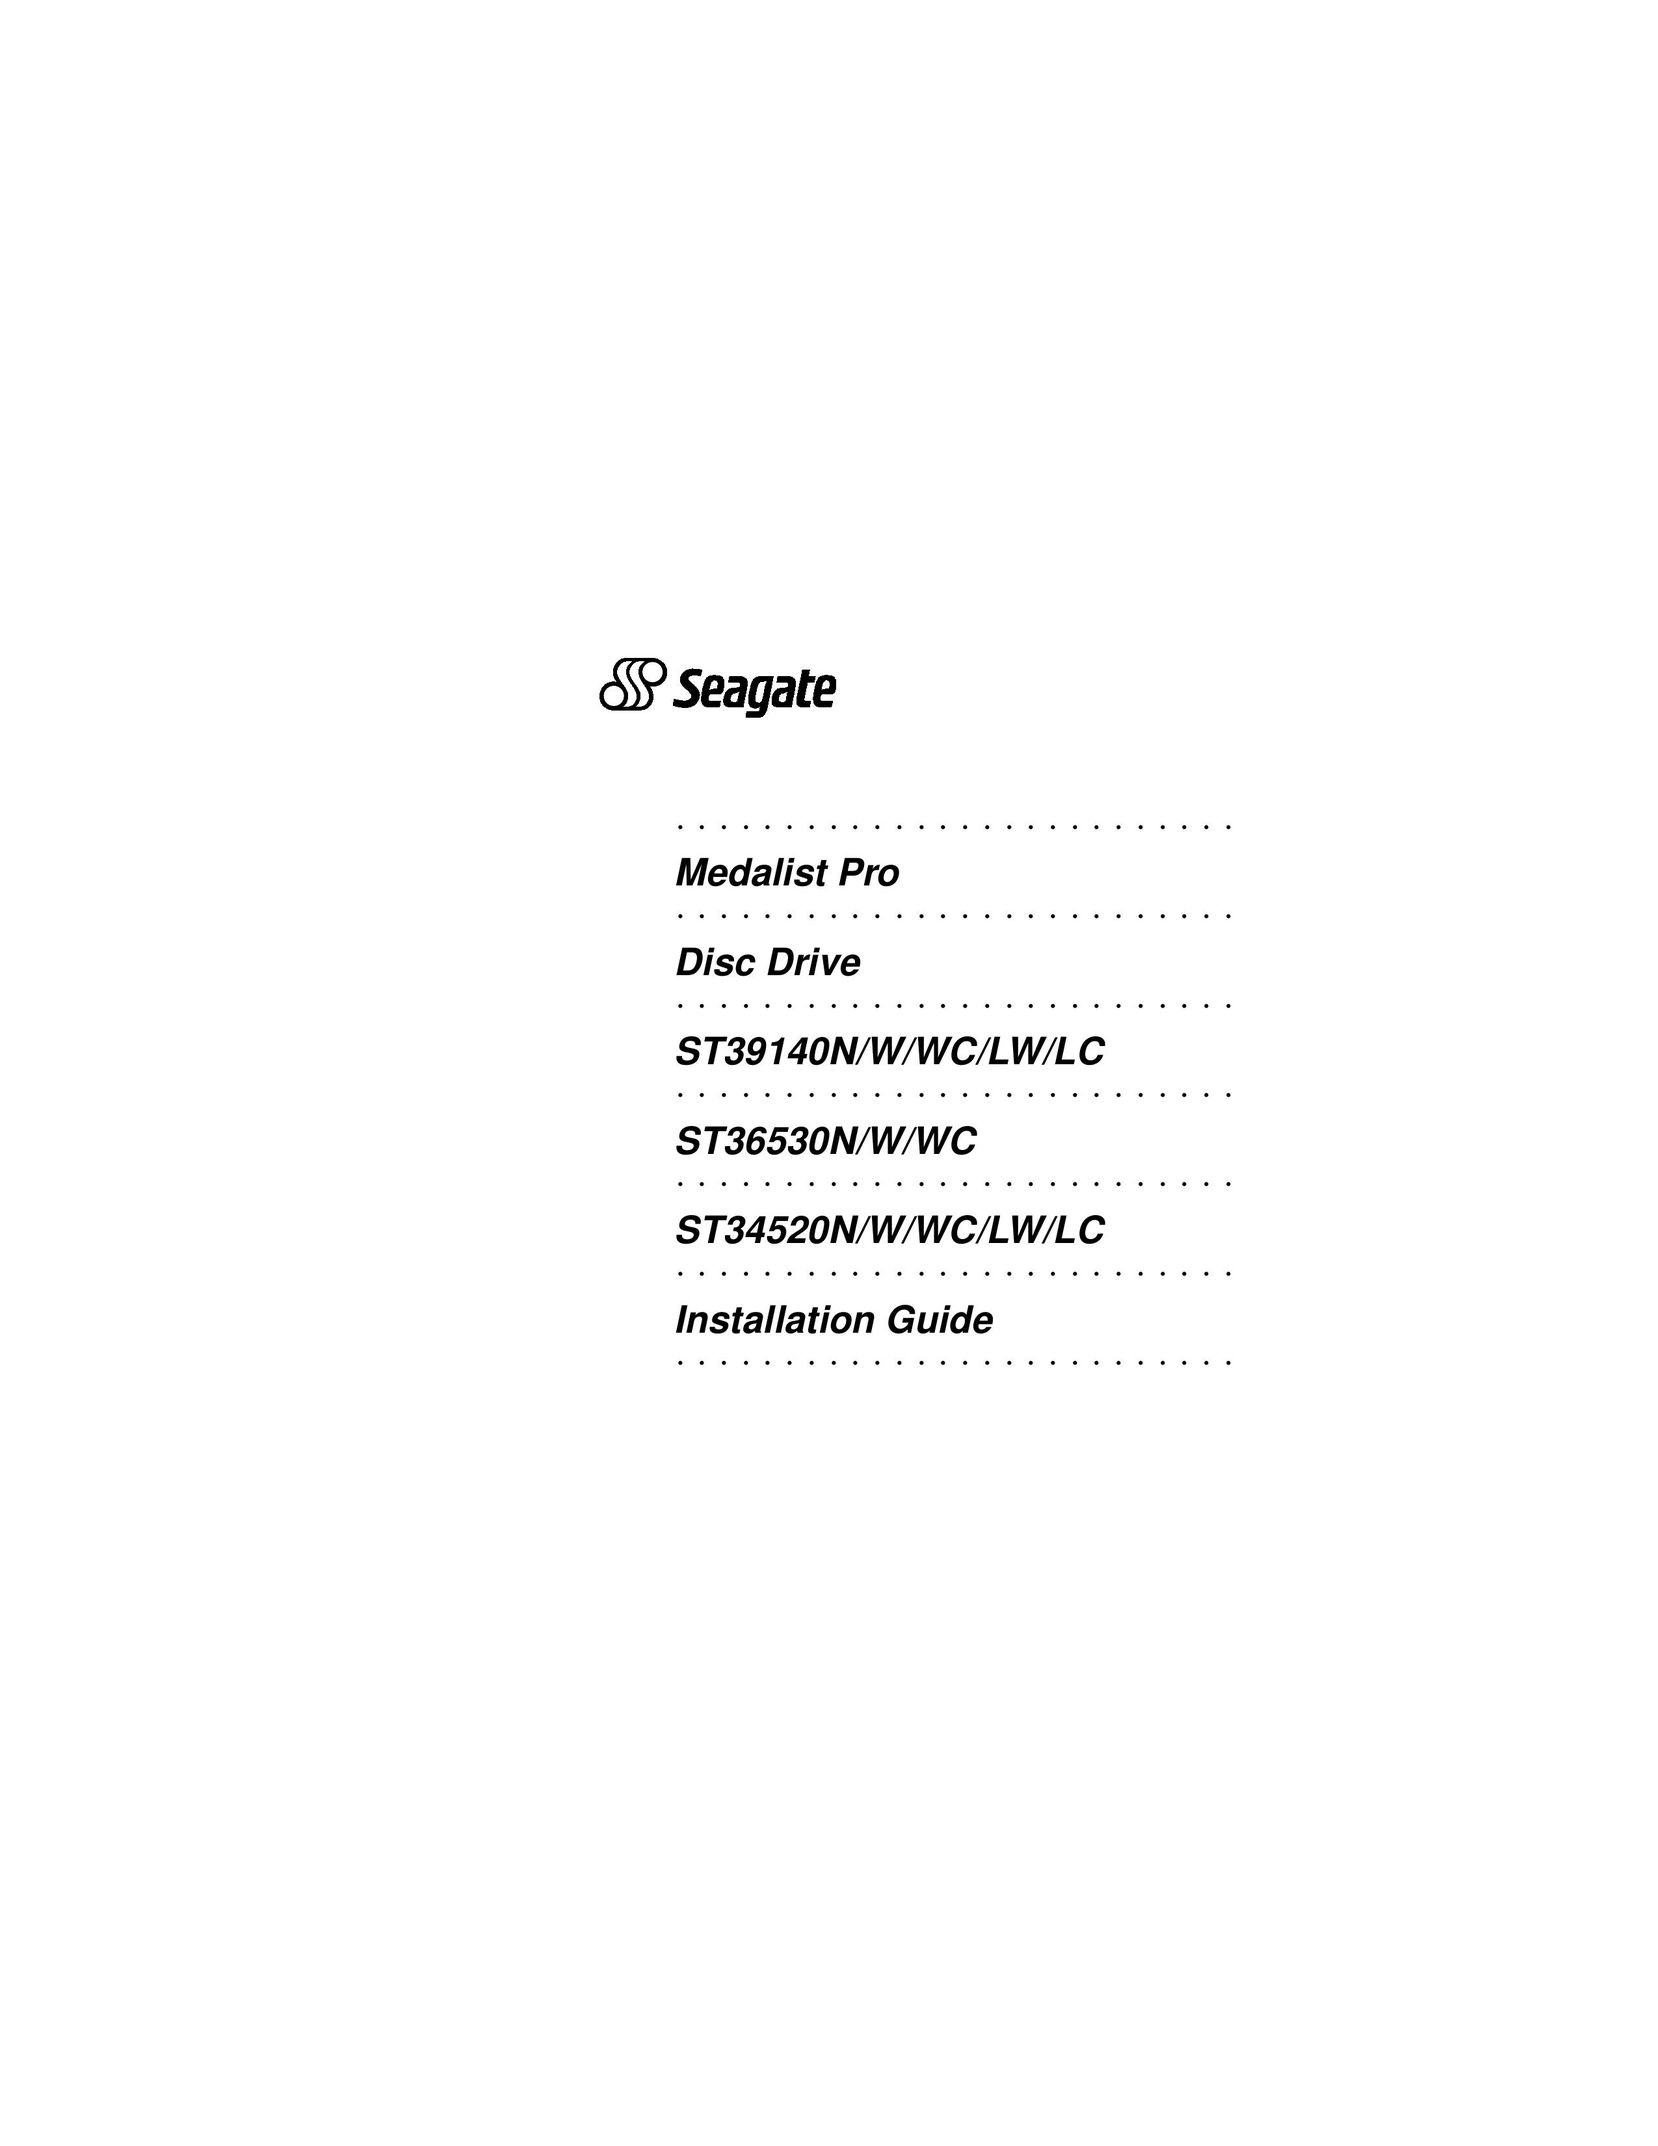 Seagate ST36530N/W/WC Thermostat User Manual